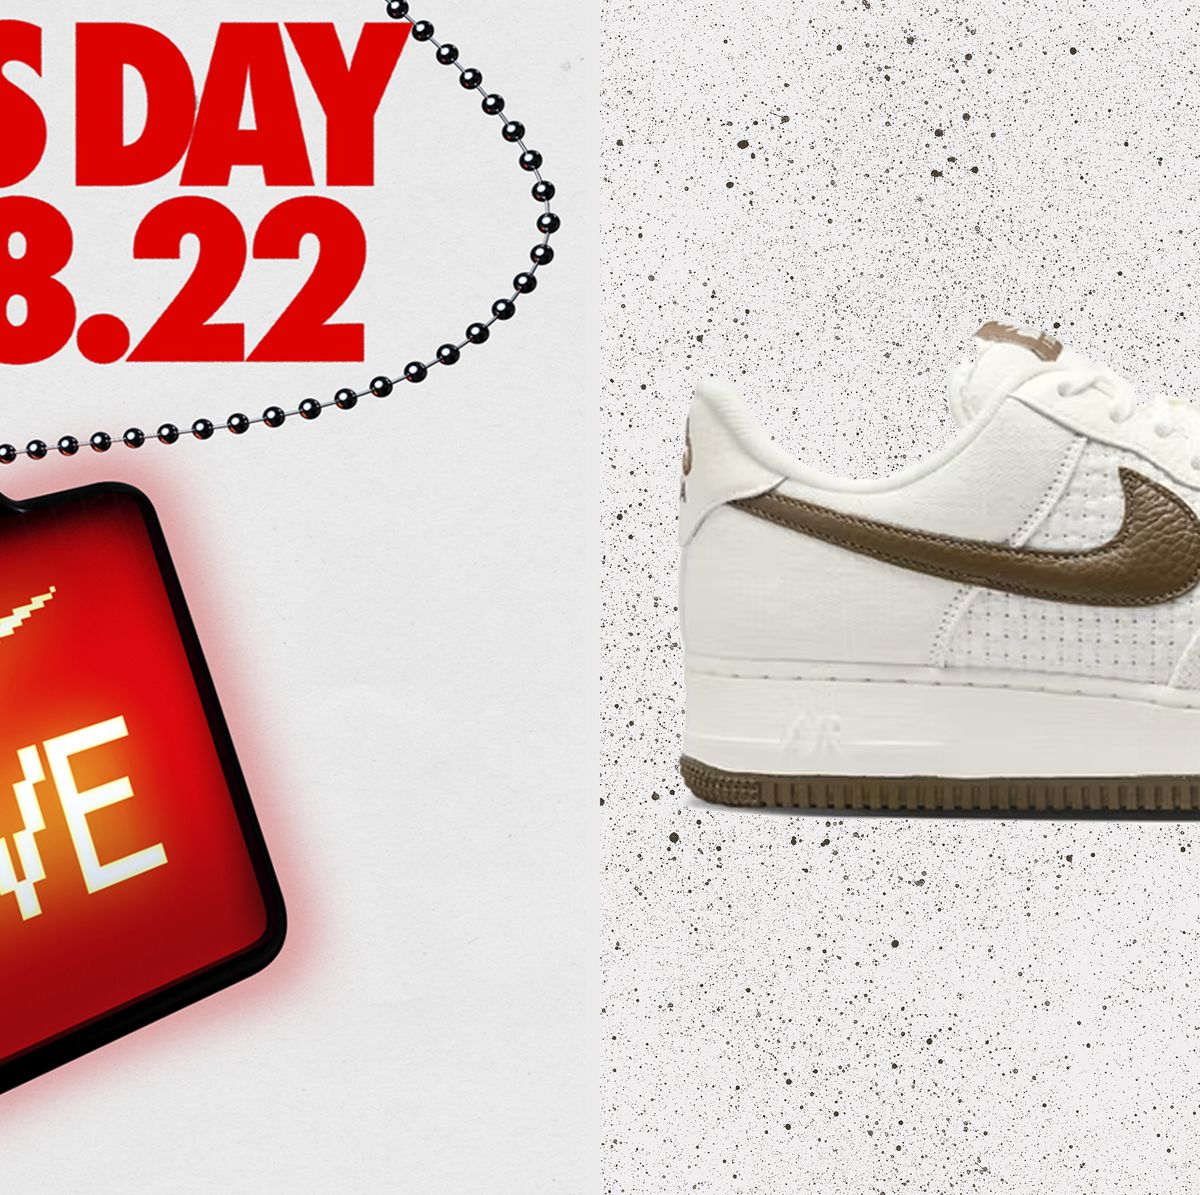 Nike Air Force 1 Low SNKRS Day 2022 Release Details - JustFreshKicks